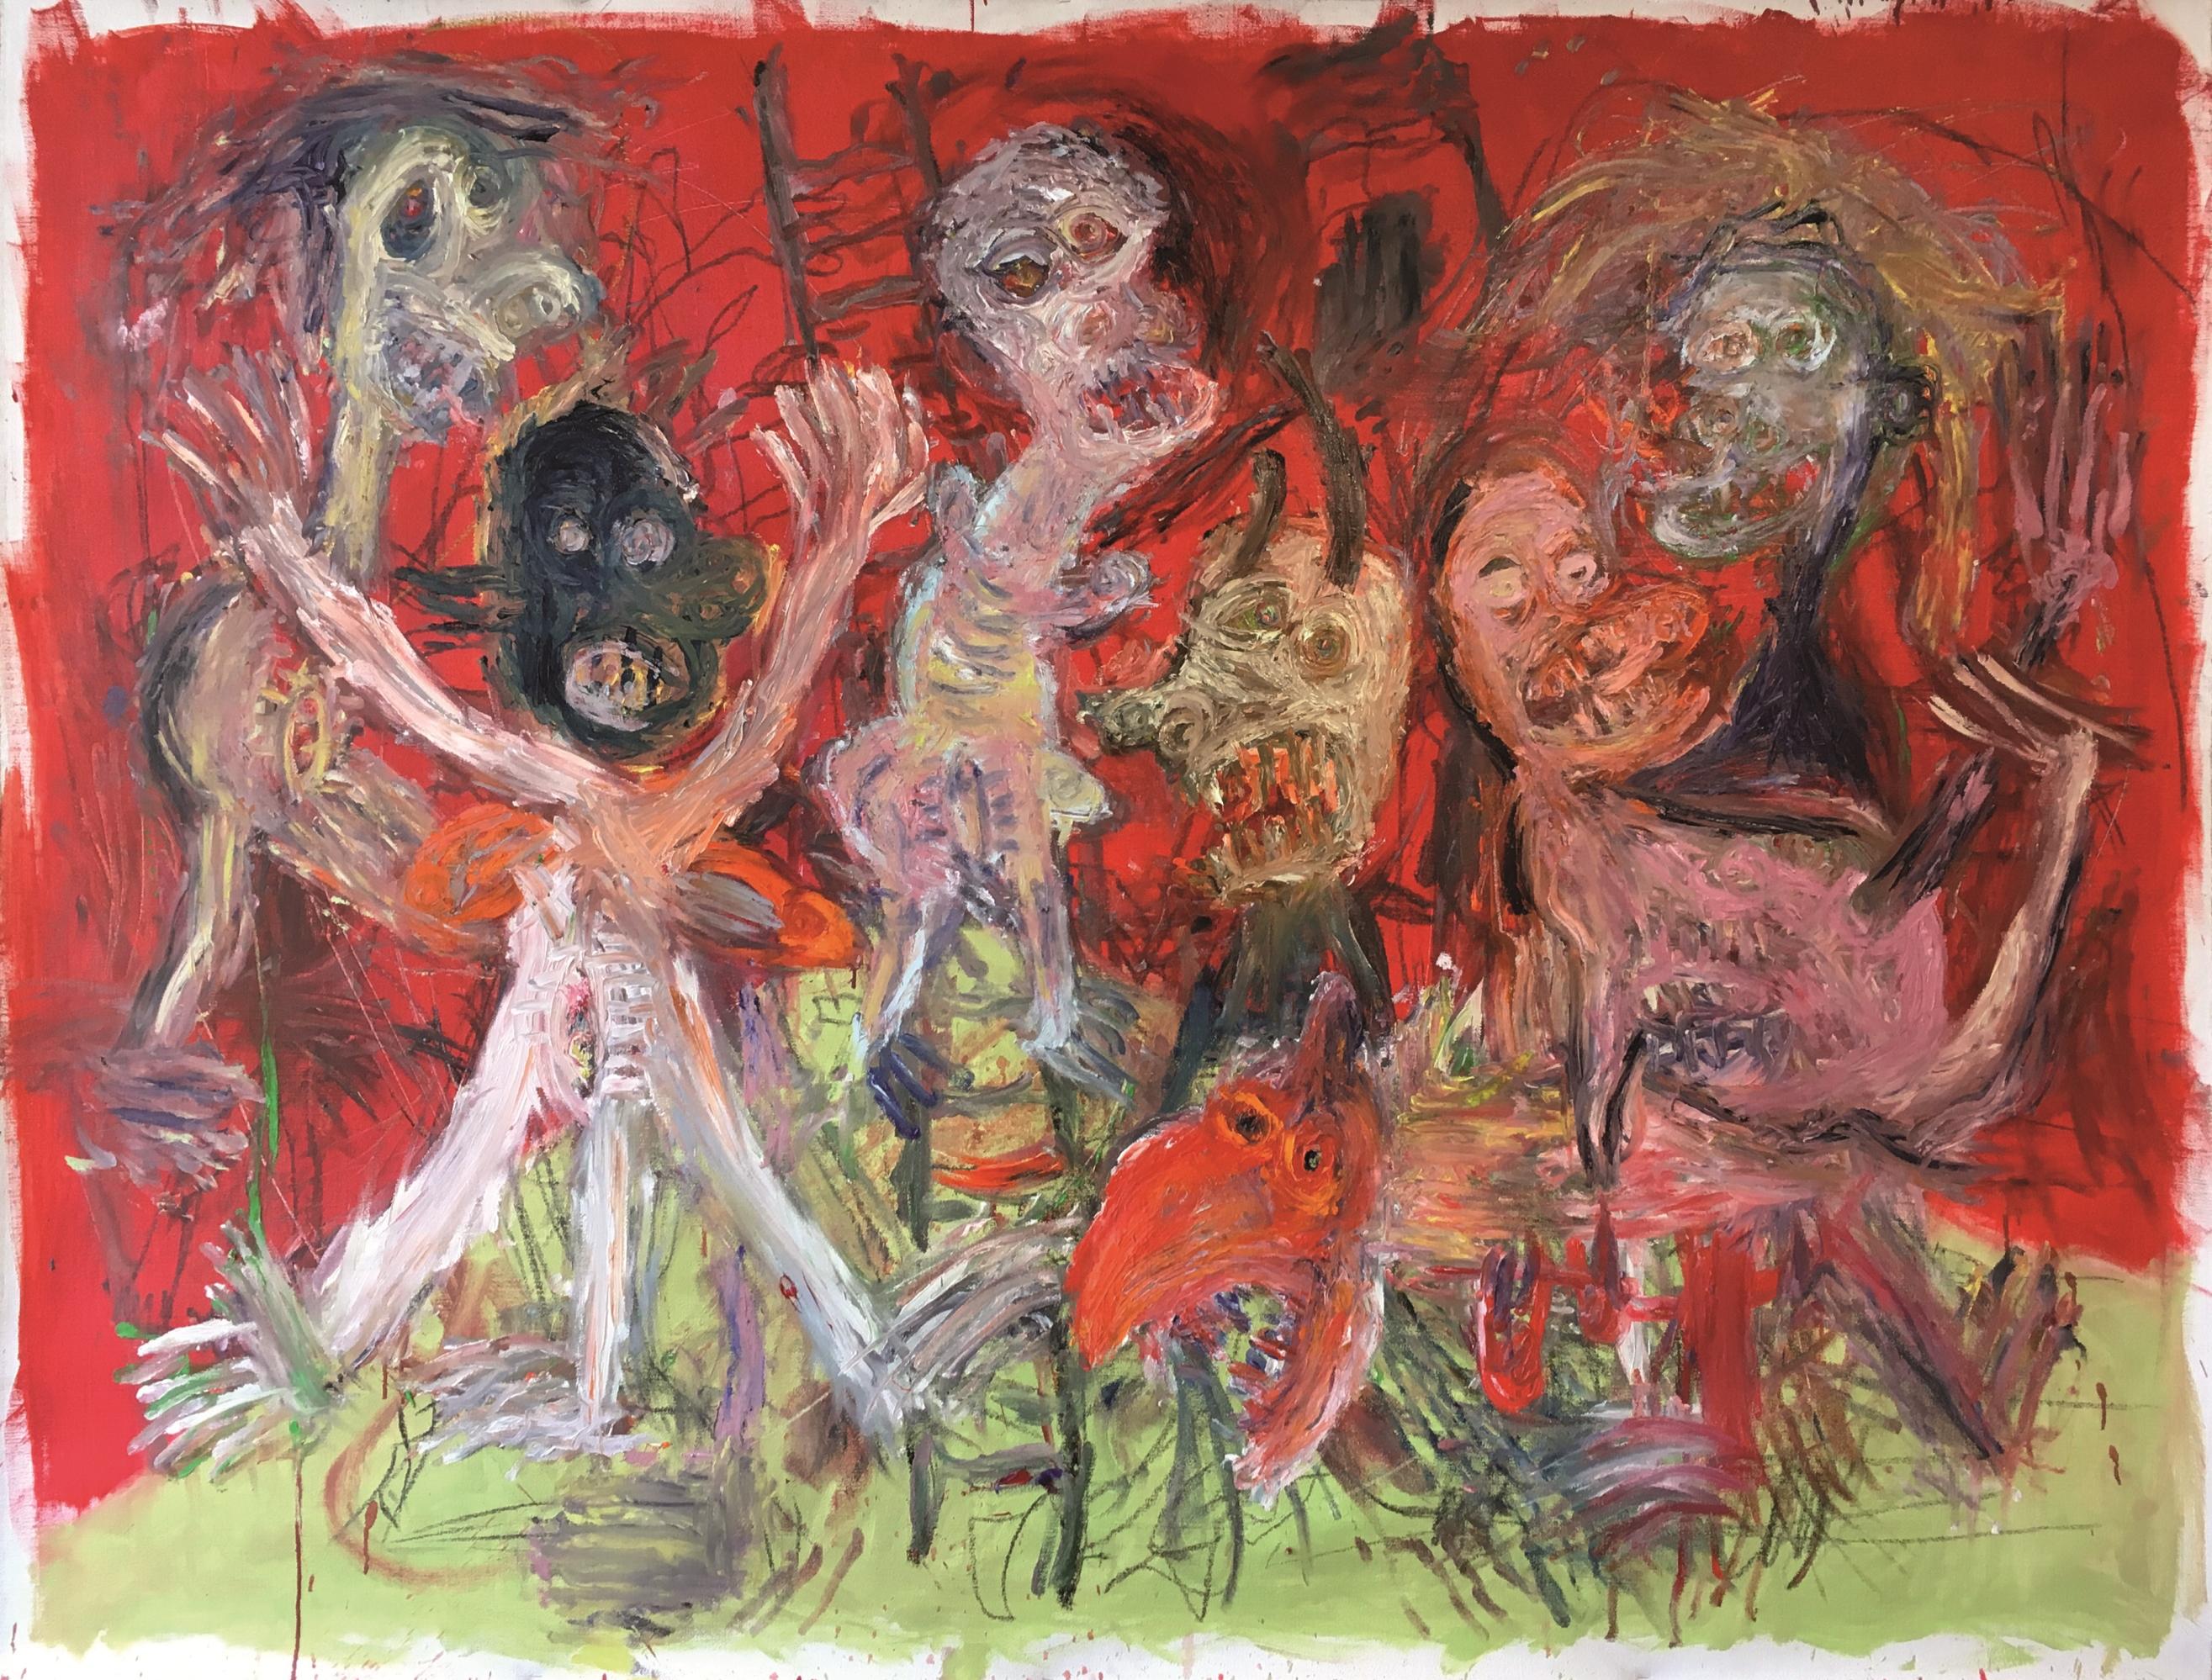 Parnassus madness-Julien Wolf, 21st Century, Contemporary Expressionist Painting